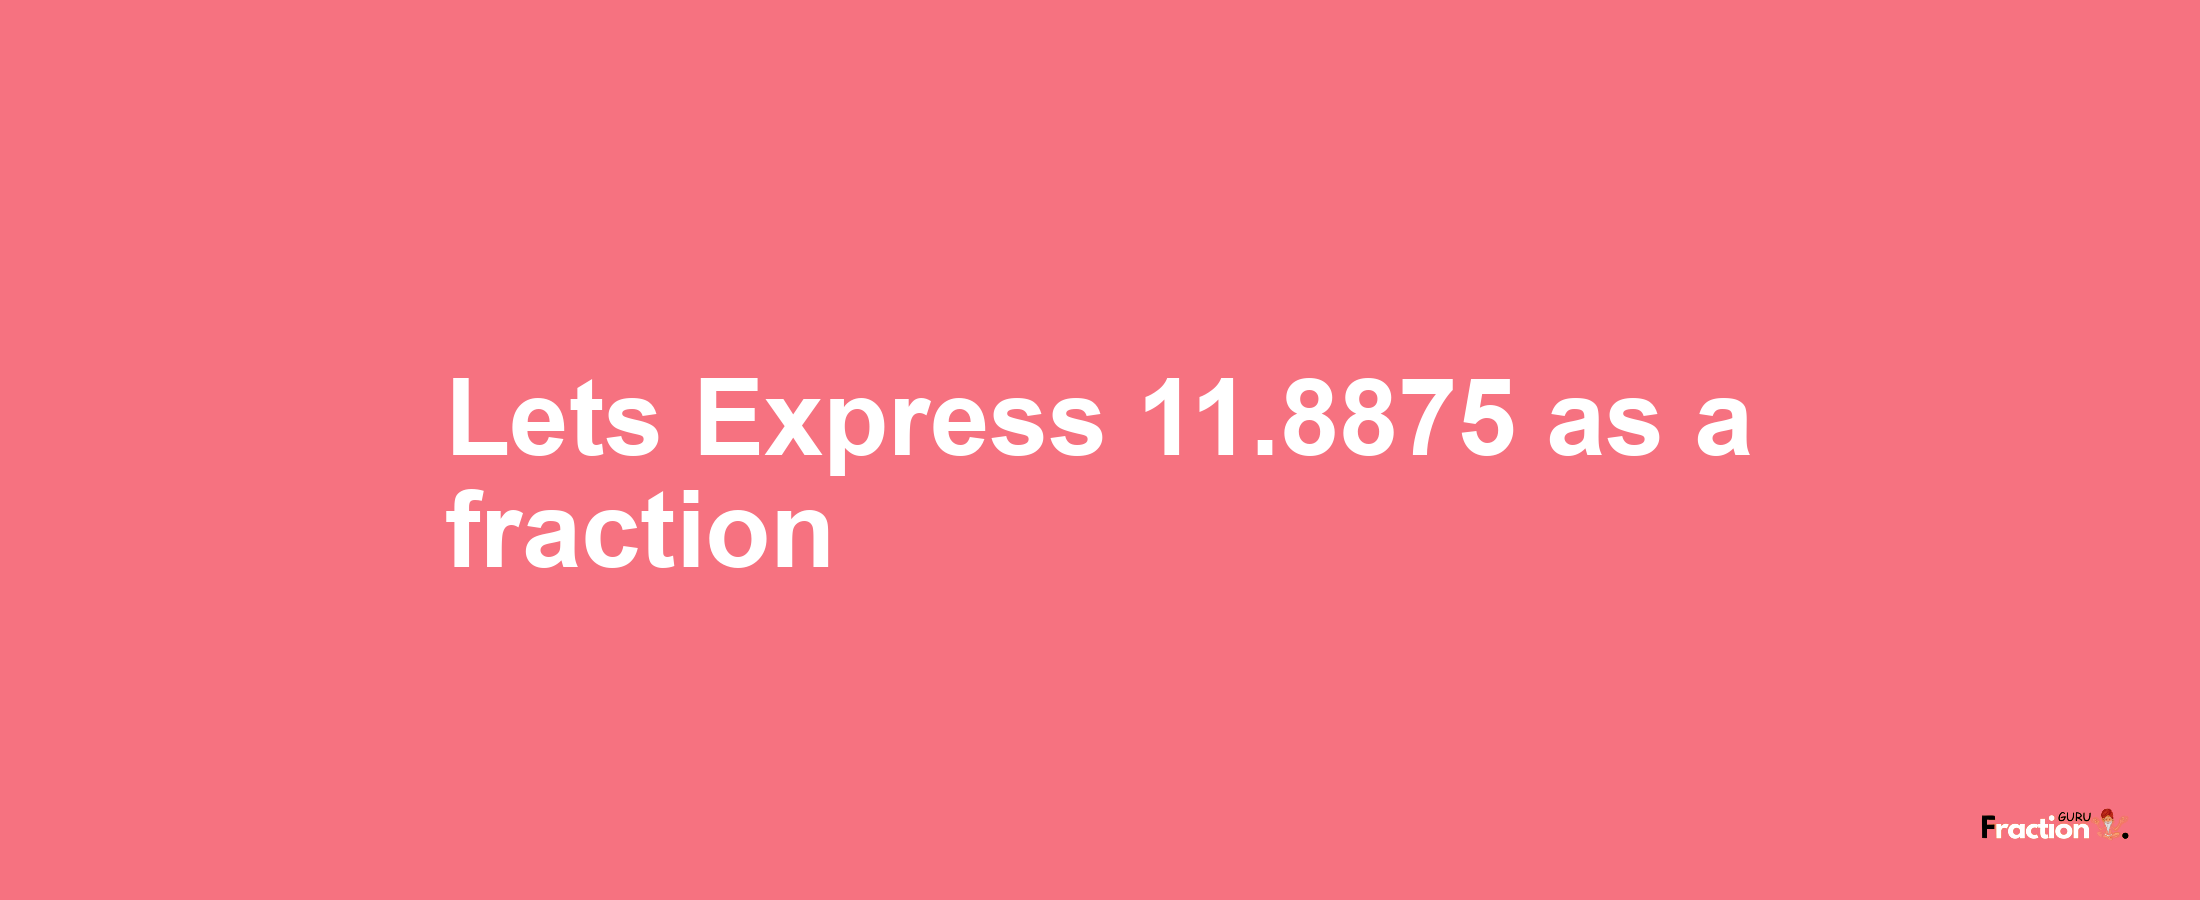 Lets Express 11.8875 as afraction